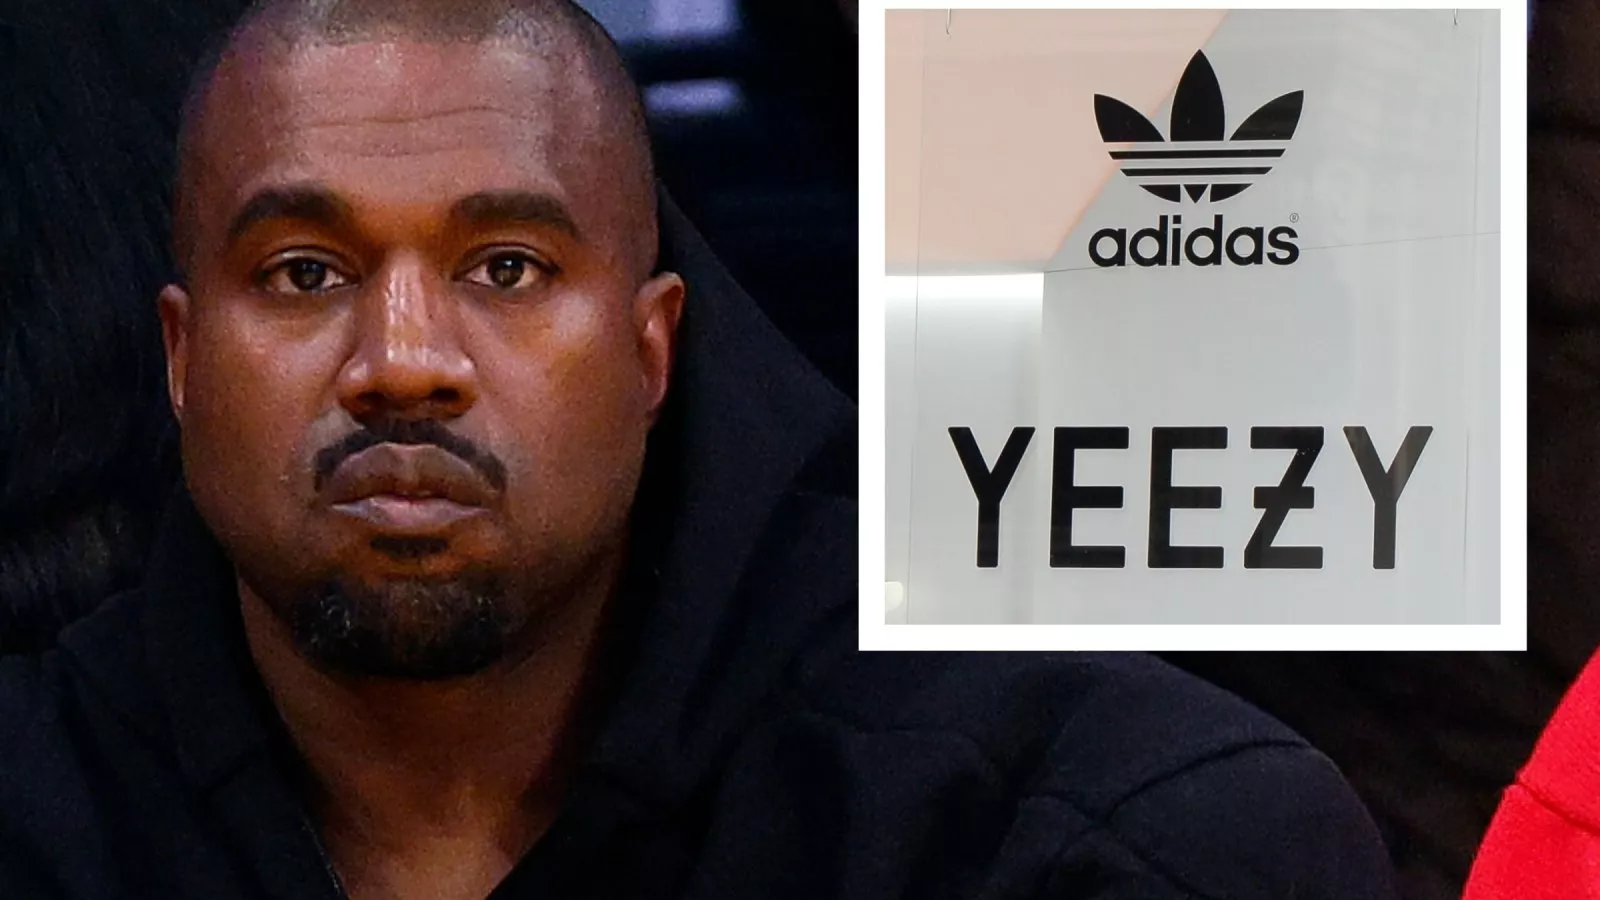 What's Next for Kanye West's Yeezy Brand as Adidas Copyright Feud Continues